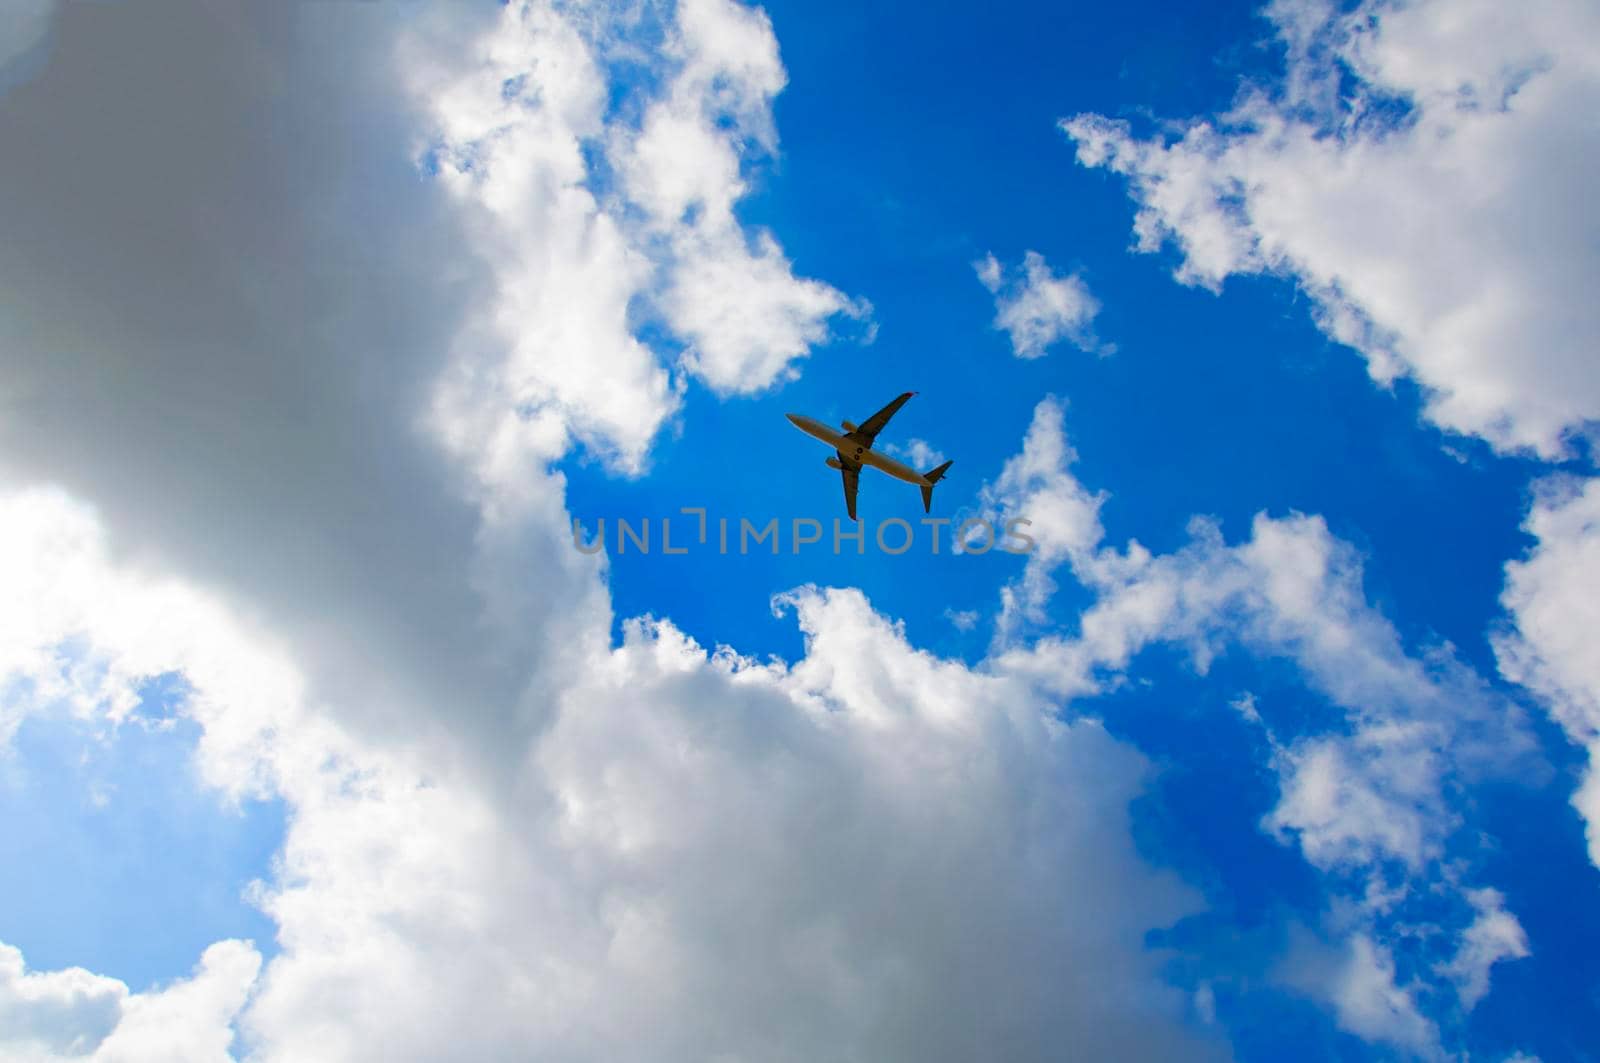 Passenger plane in the blue cloudy sky by Bezdnatm